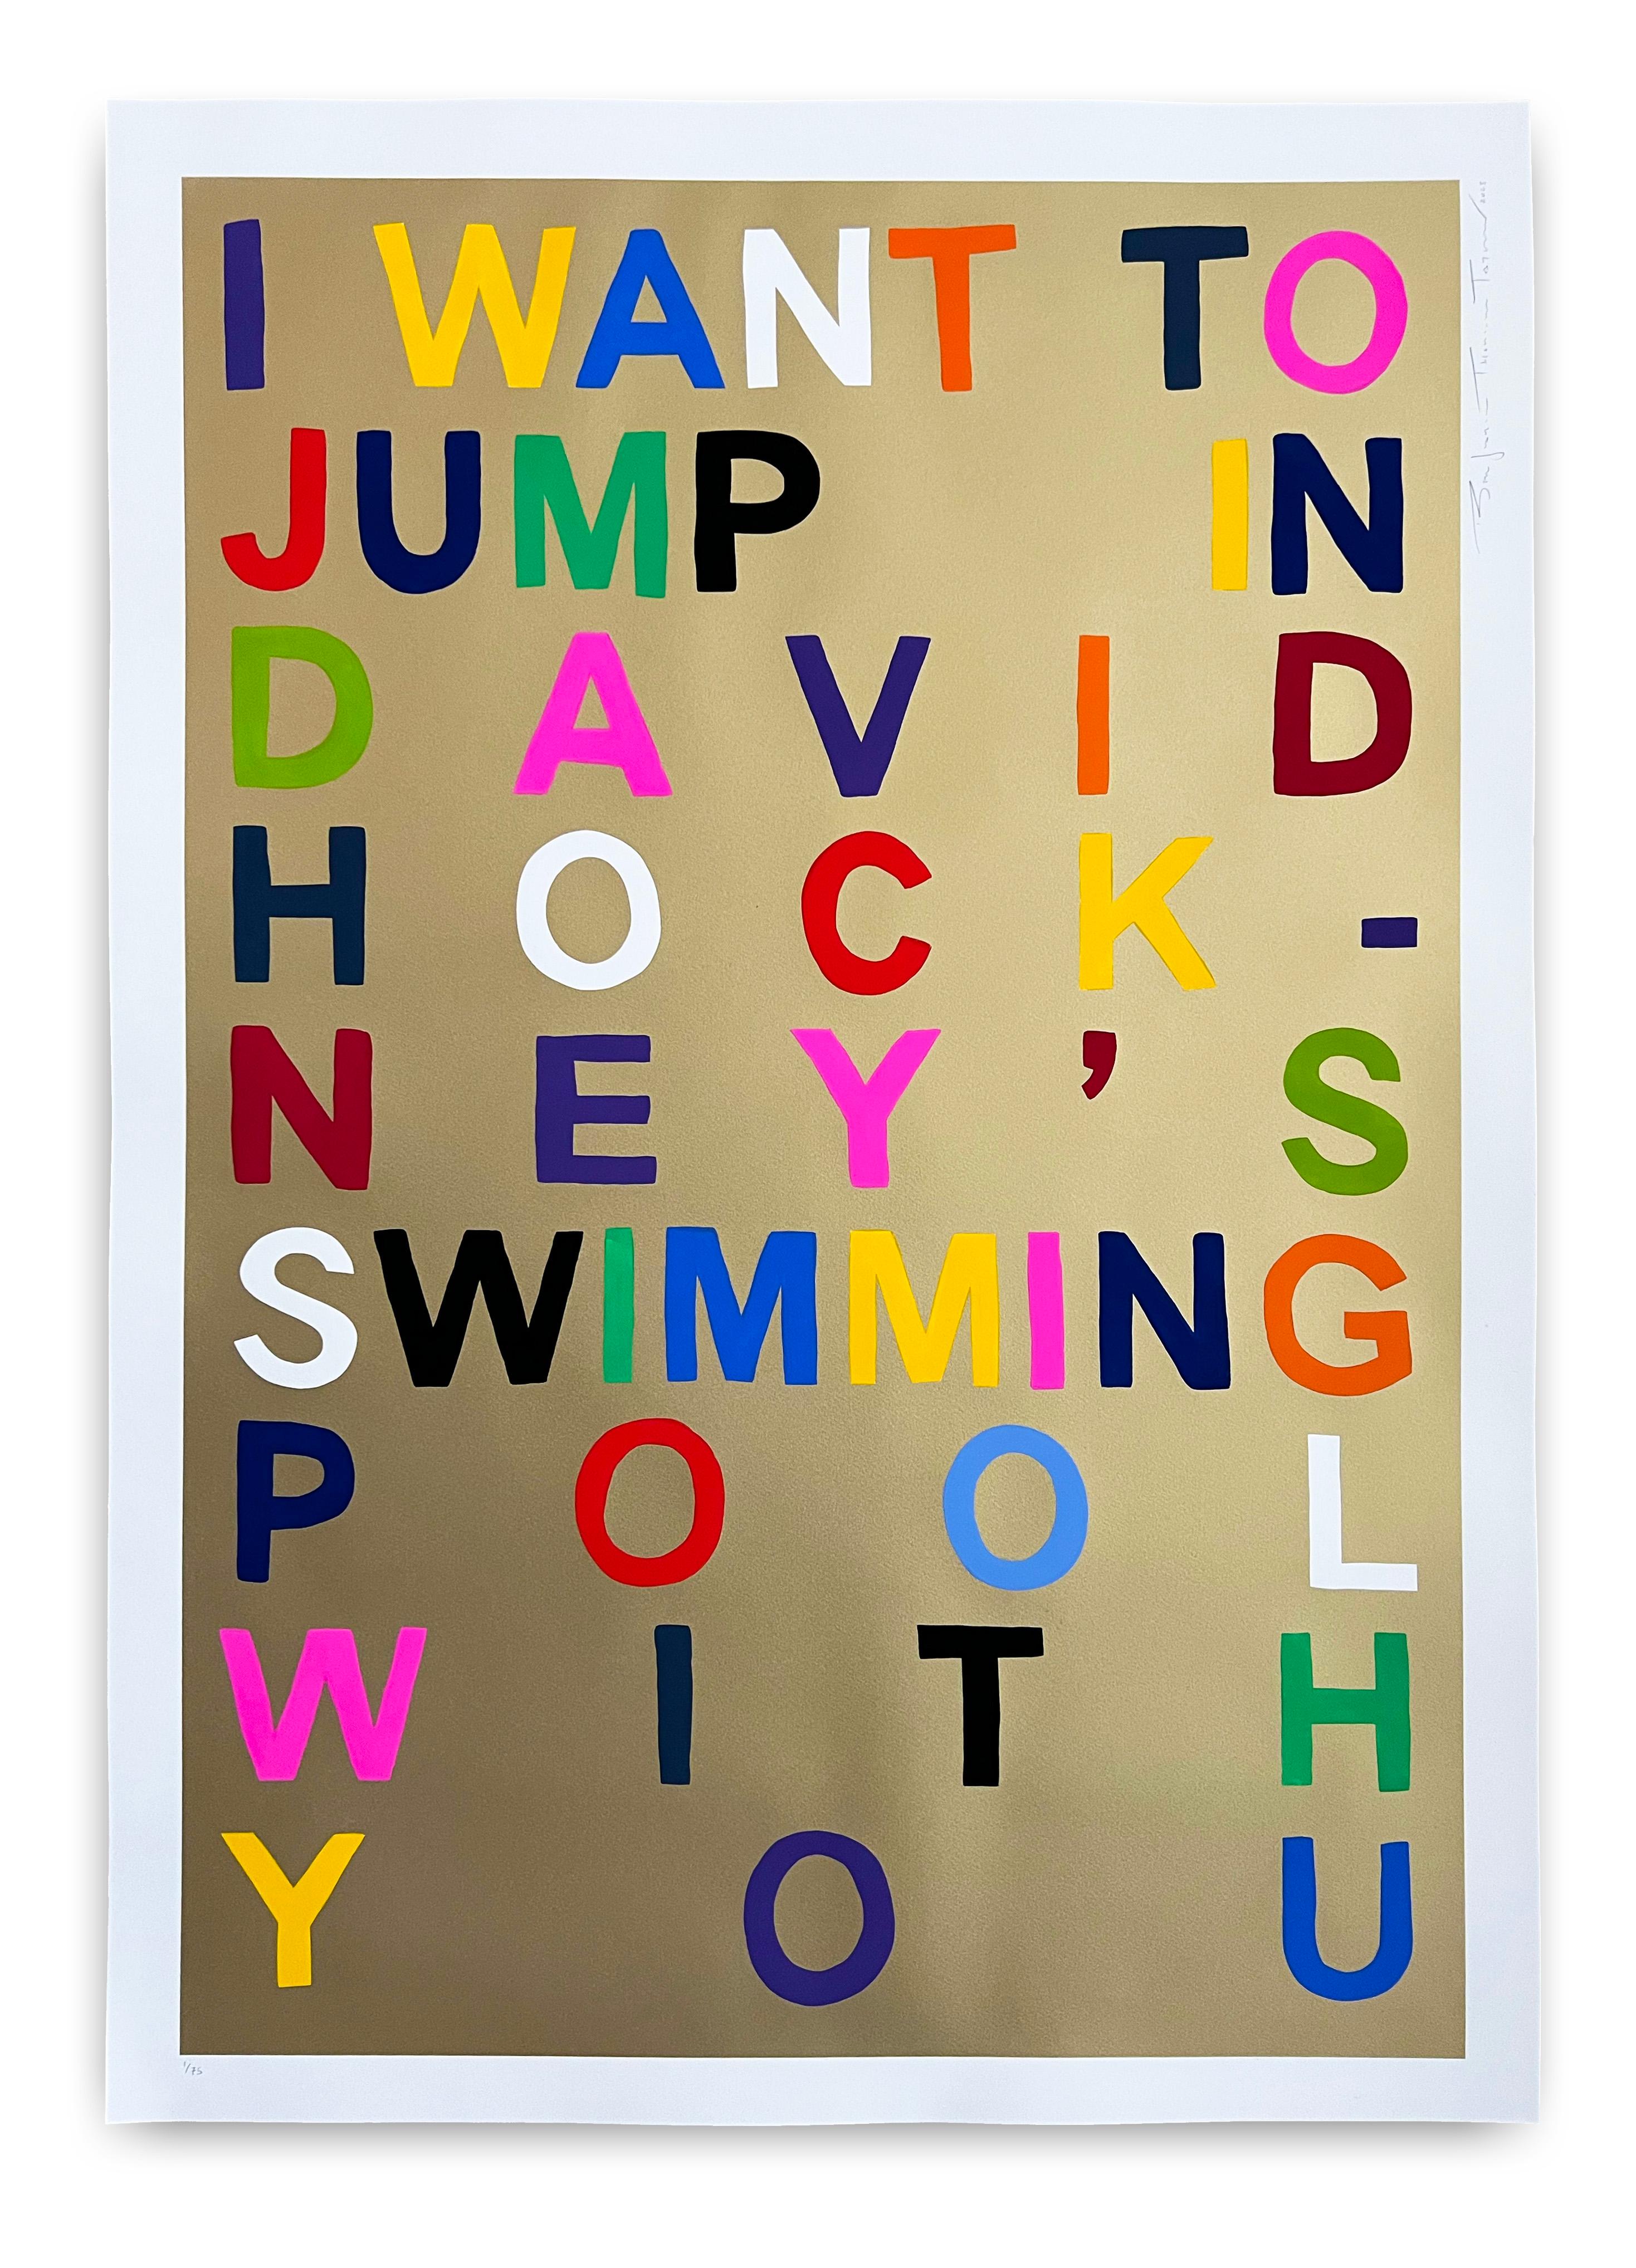 Benjamin Thomas Taylor
I Want To Jump In David Hockney’s Swimming Pool With You, 2023
Hand finished screen print on 300gsm Somerset Satin Paper
39 2/5 × 27 3/5 in  100 × 70 cm
Edition of 75 (1/75)